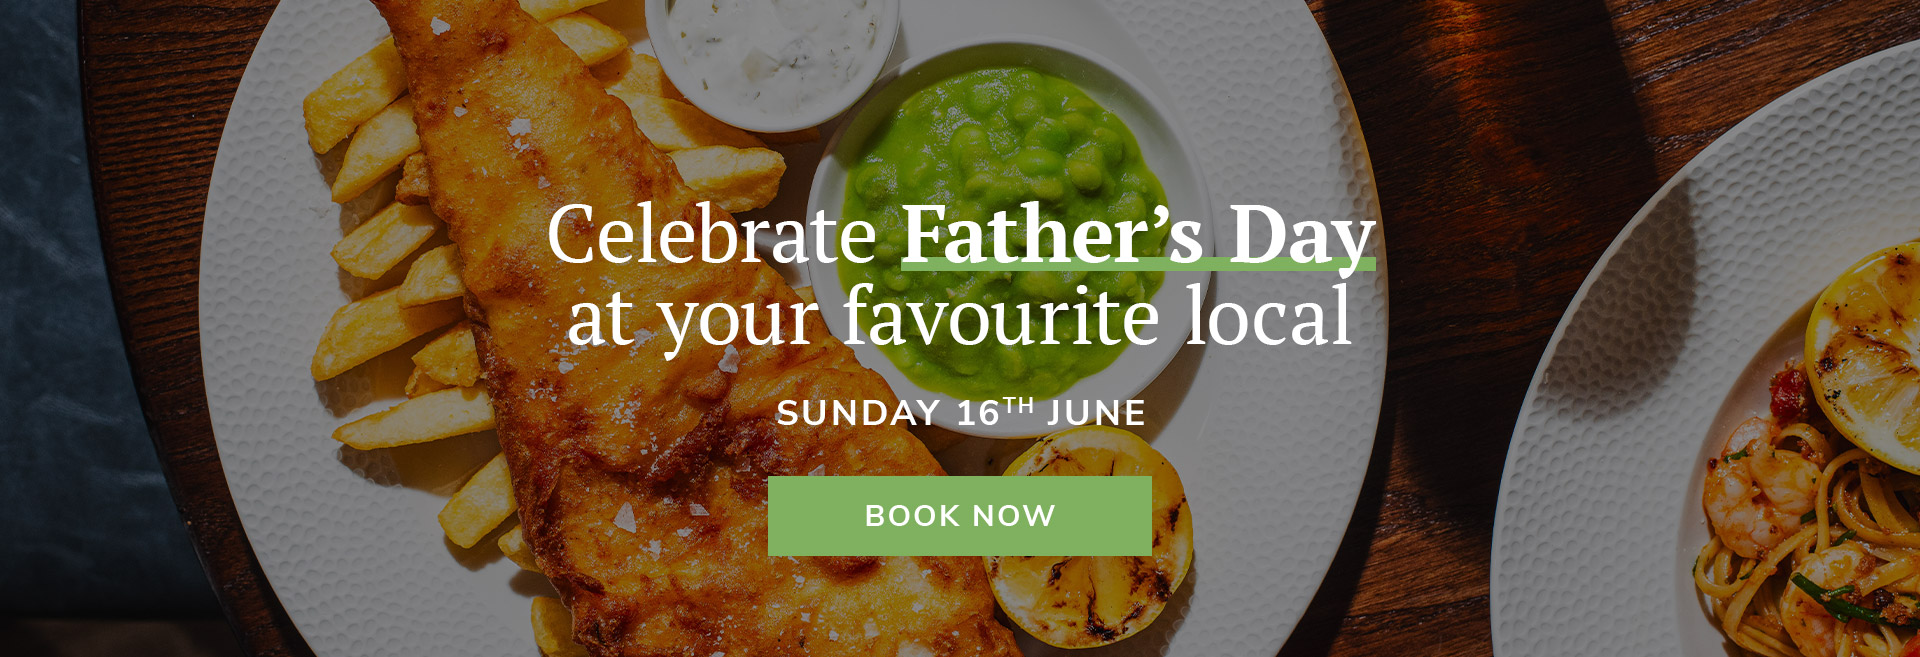 Father's Day at The Albany